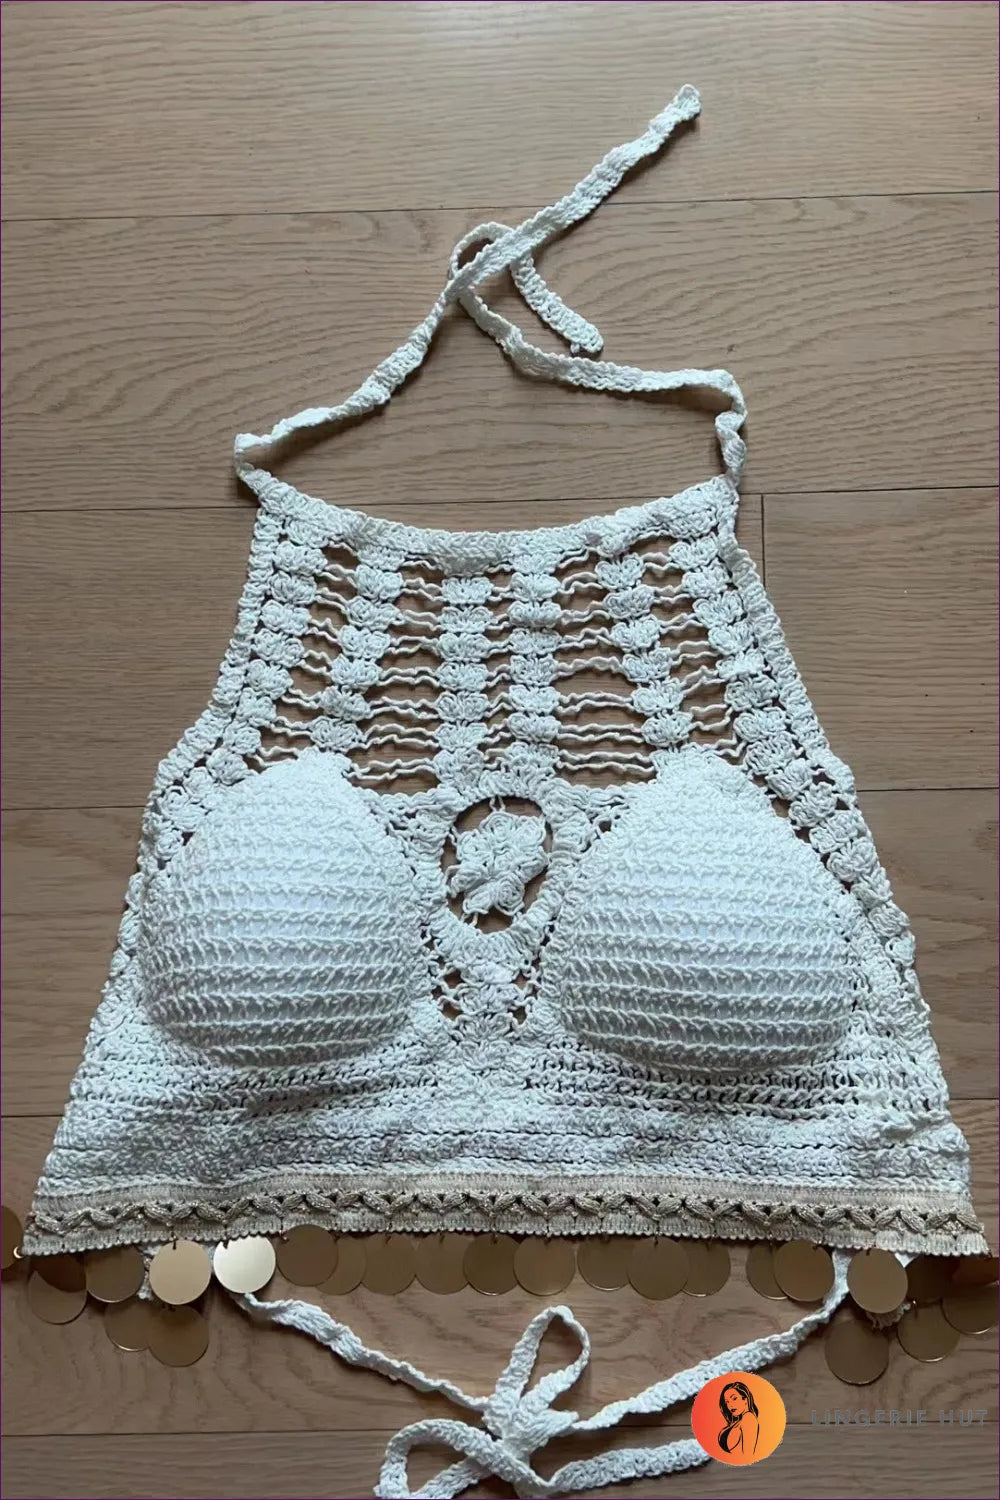 Elevate Your Summer Style With Our Crocheted Hollow Sling Rear Strap Summer Top. It’s The Perfect Blend